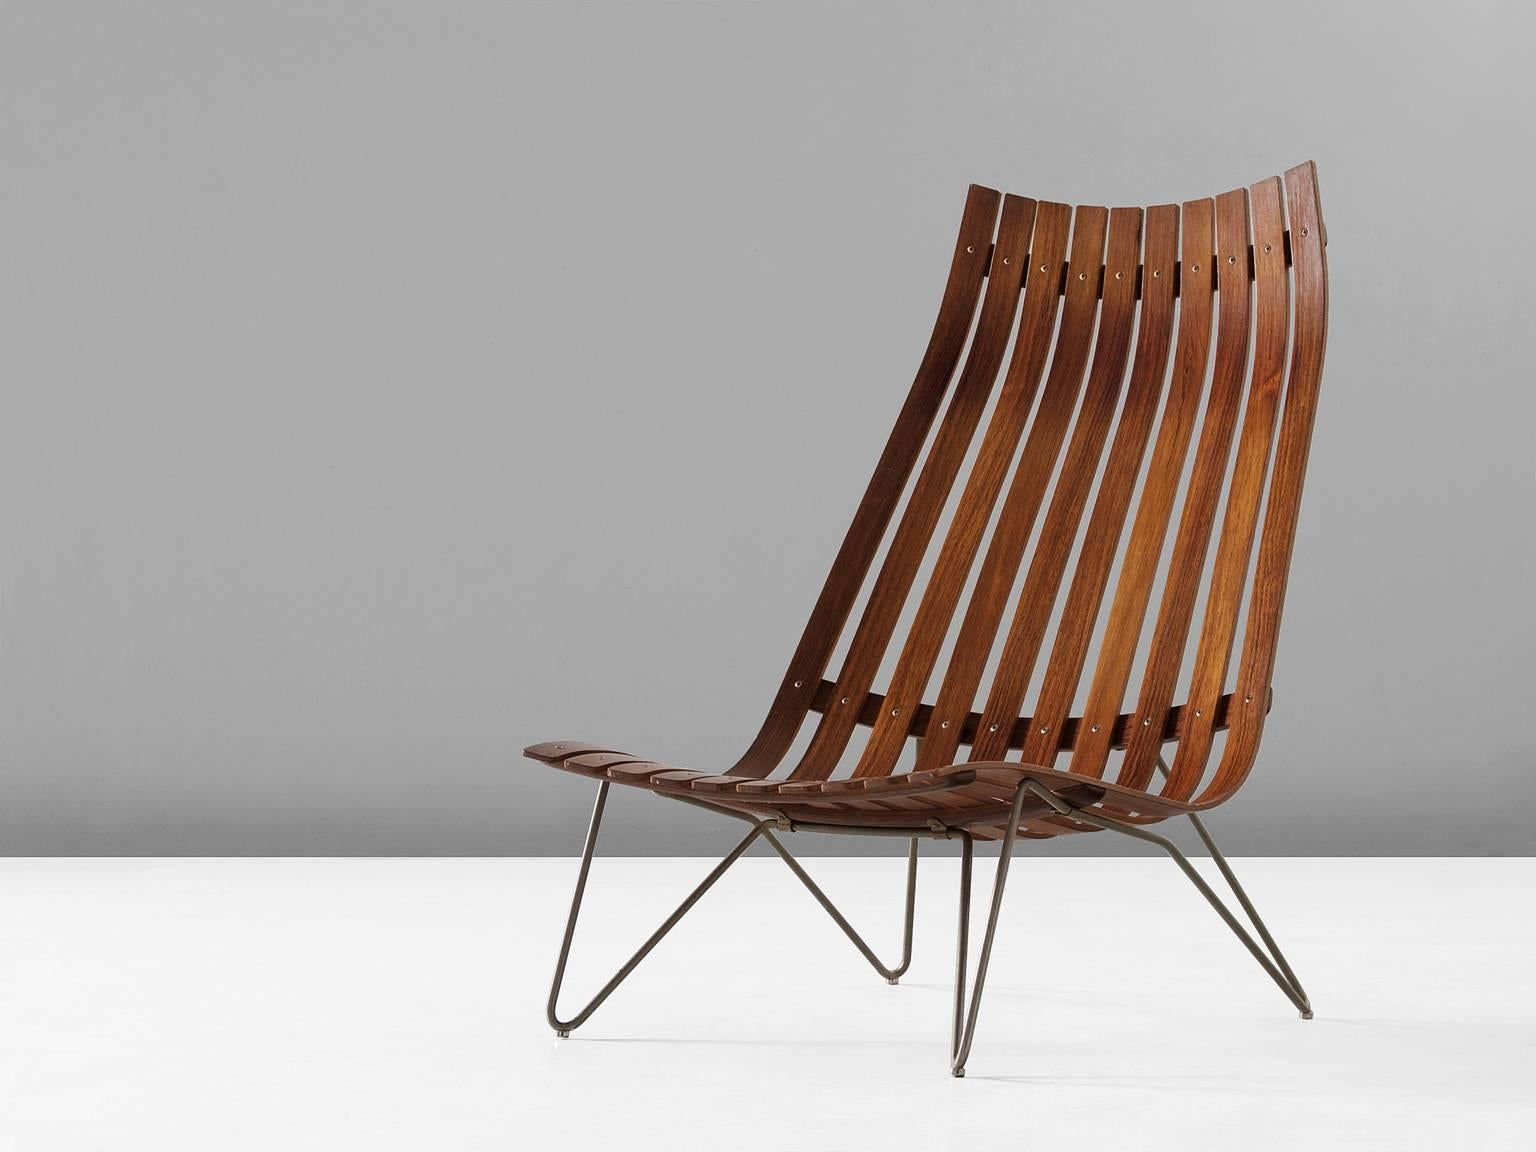 Lounge chair model Scandia, in rosewood and metal, by Hans Brattrud for Hove Mobler, Norway, circa 1957. 

Elegant and modern lounge chair in warm rosewood. This slatted chair shows an interesting 'hairpin' frame of one piece of bended metal. The